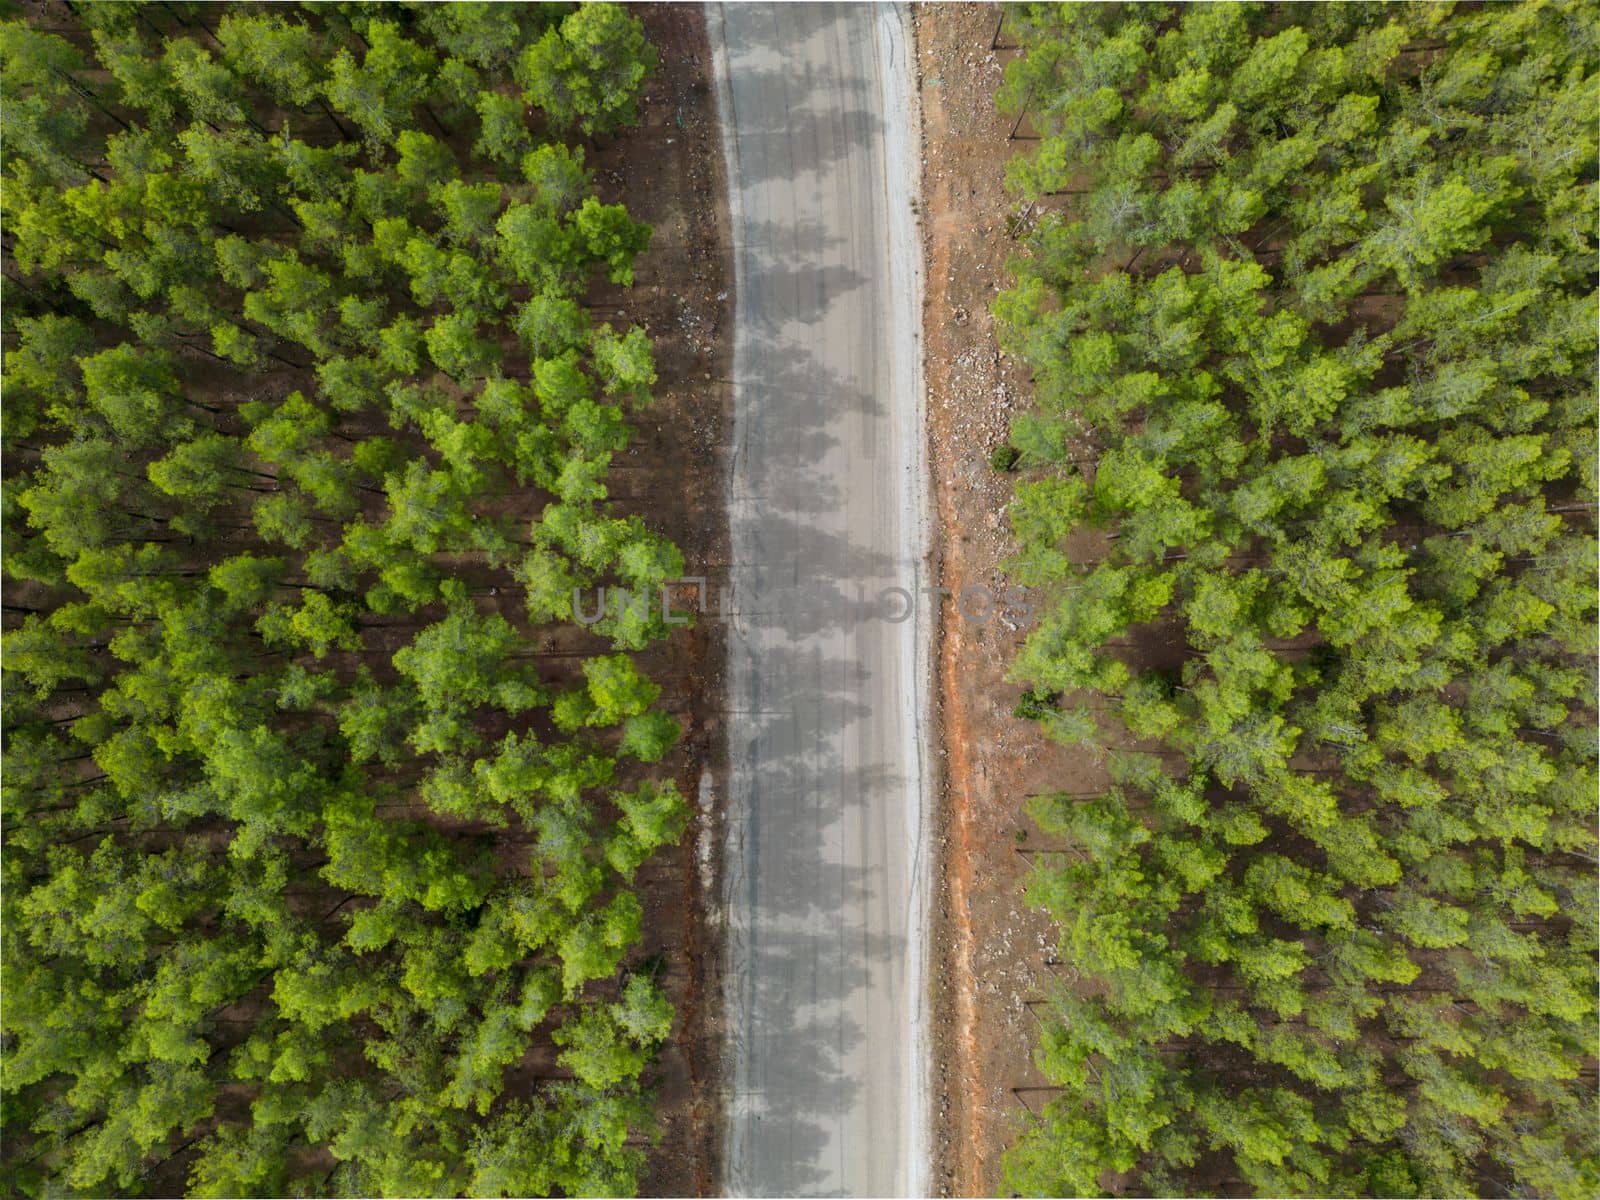 Top down view of road through forest at sunrise